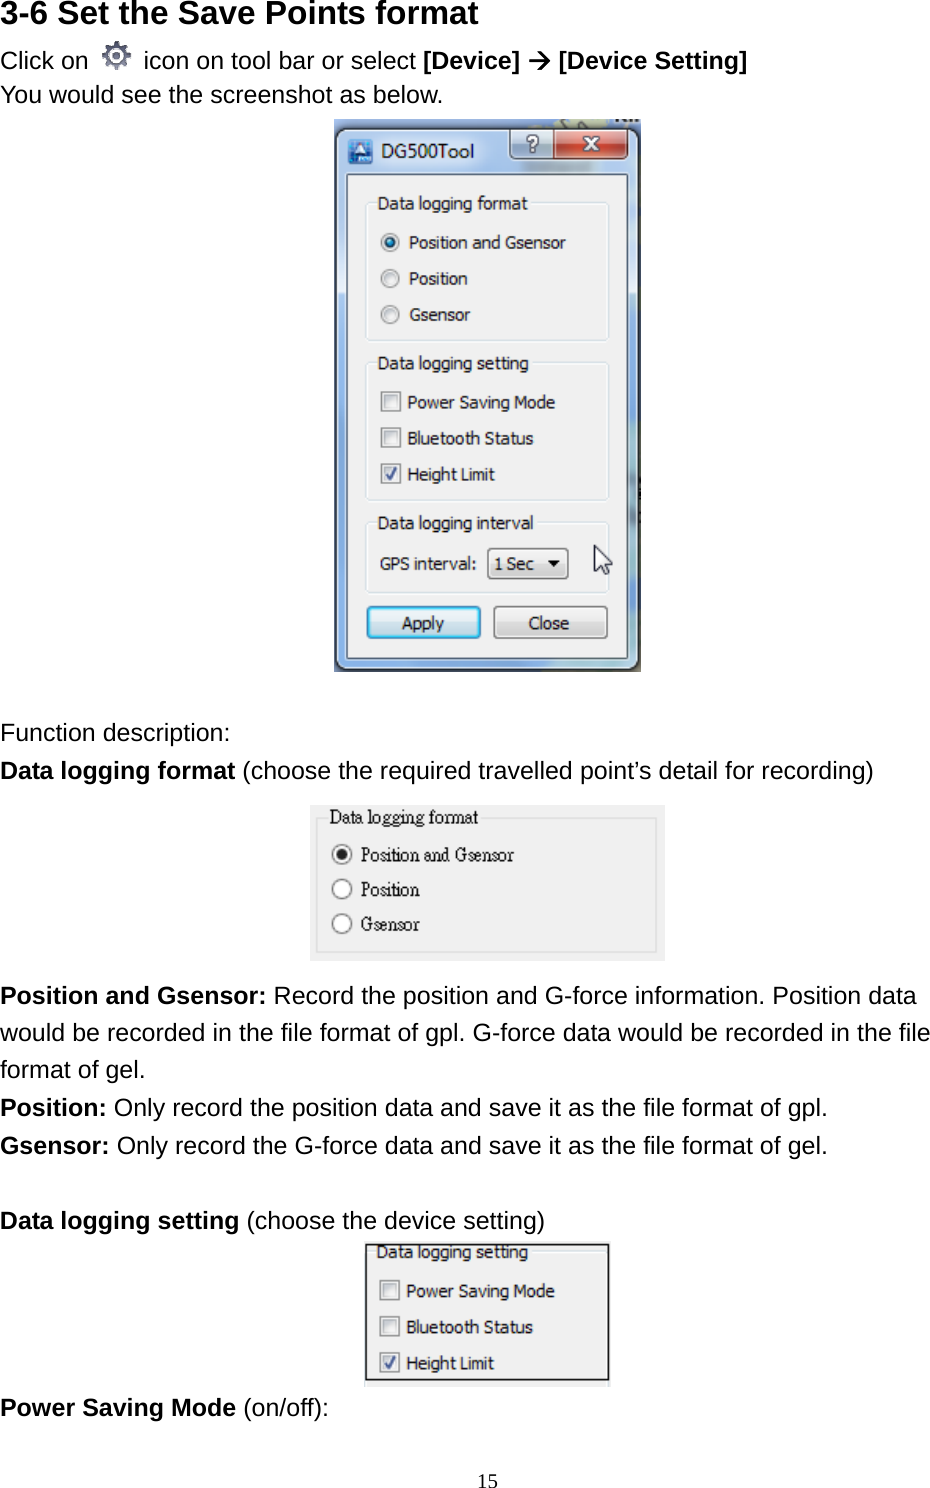  153-6 Set the Save Points format   Click on    icon on tool bar or select [Device]  [Device Setting] You would see the screenshot as below.     Function description: Data logging format (choose the required travelled point’s detail for recording)  Position and Gsensor: Record the position and G-force information. Position data would be recorded in the file format of gpl. G-force data would be recorded in the file format of gel. Position: Only record the position data and save it as the file format of gpl. Gsensor: Only record the G-force data and save it as the file format of gel.  Data logging setting (choose the device setting)  Power Saving Mode (on/off):   